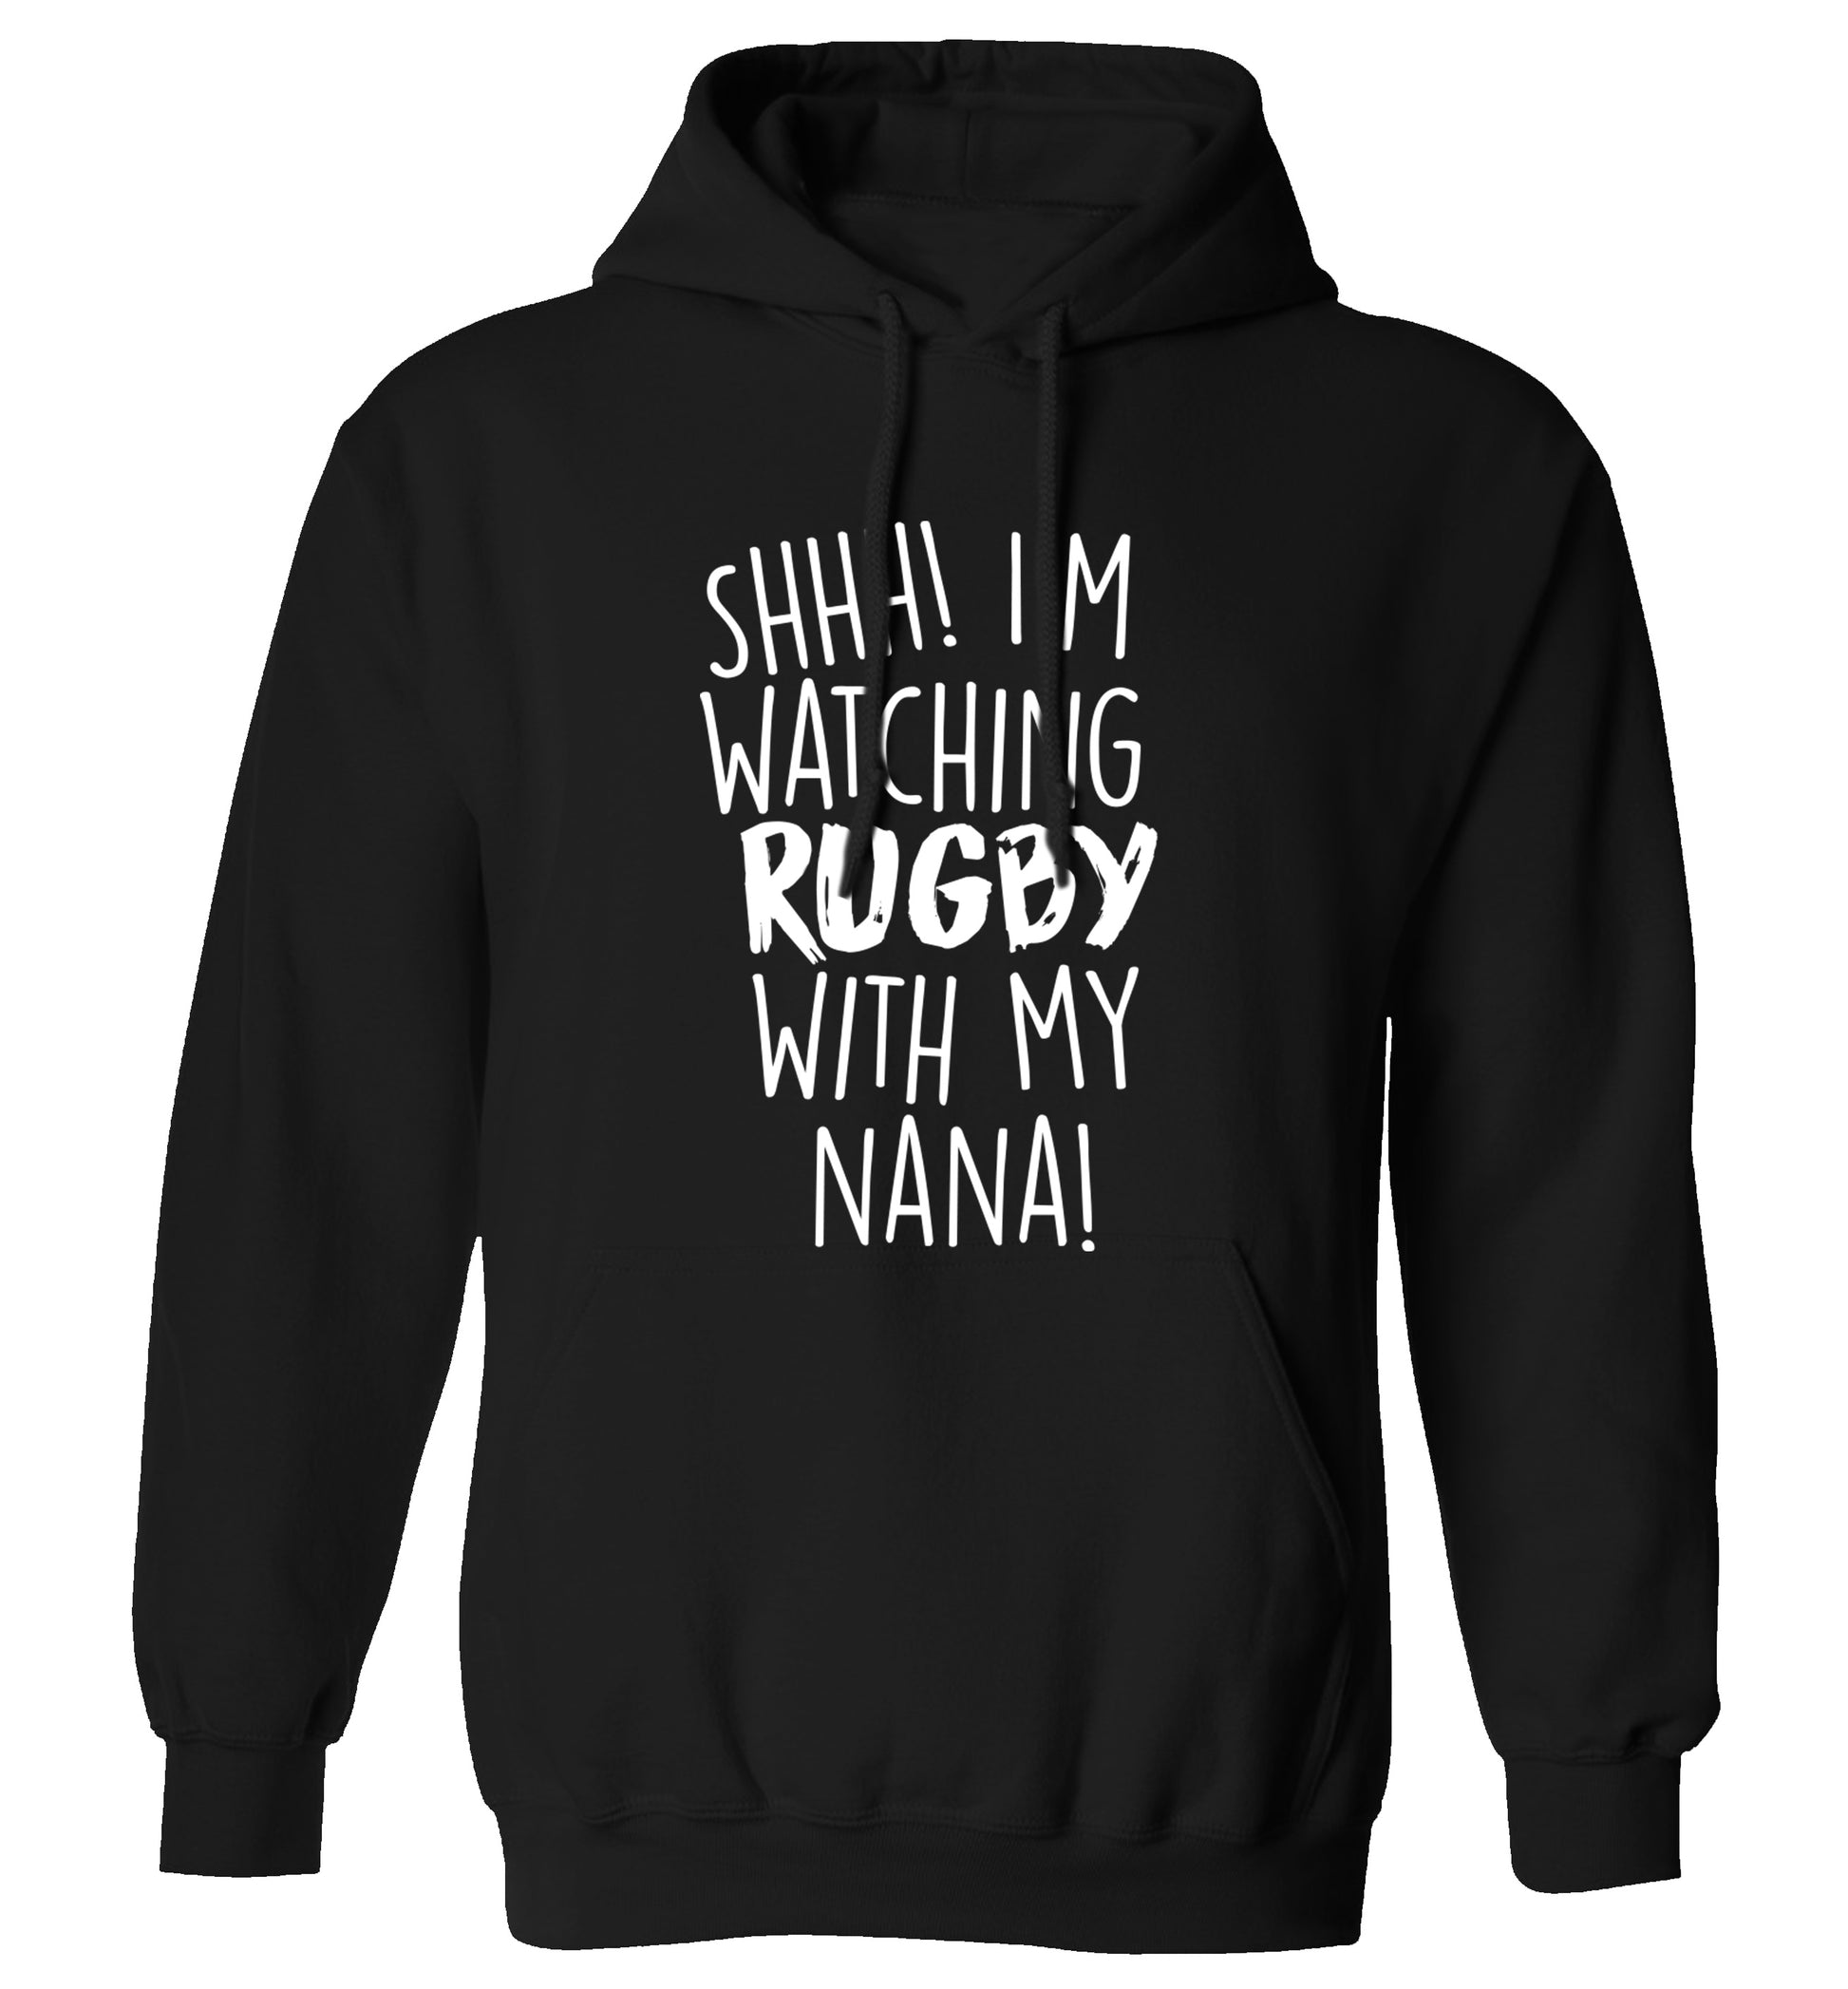 Shh I'm watching rugby with my nana adults unisex black hoodie 2XL